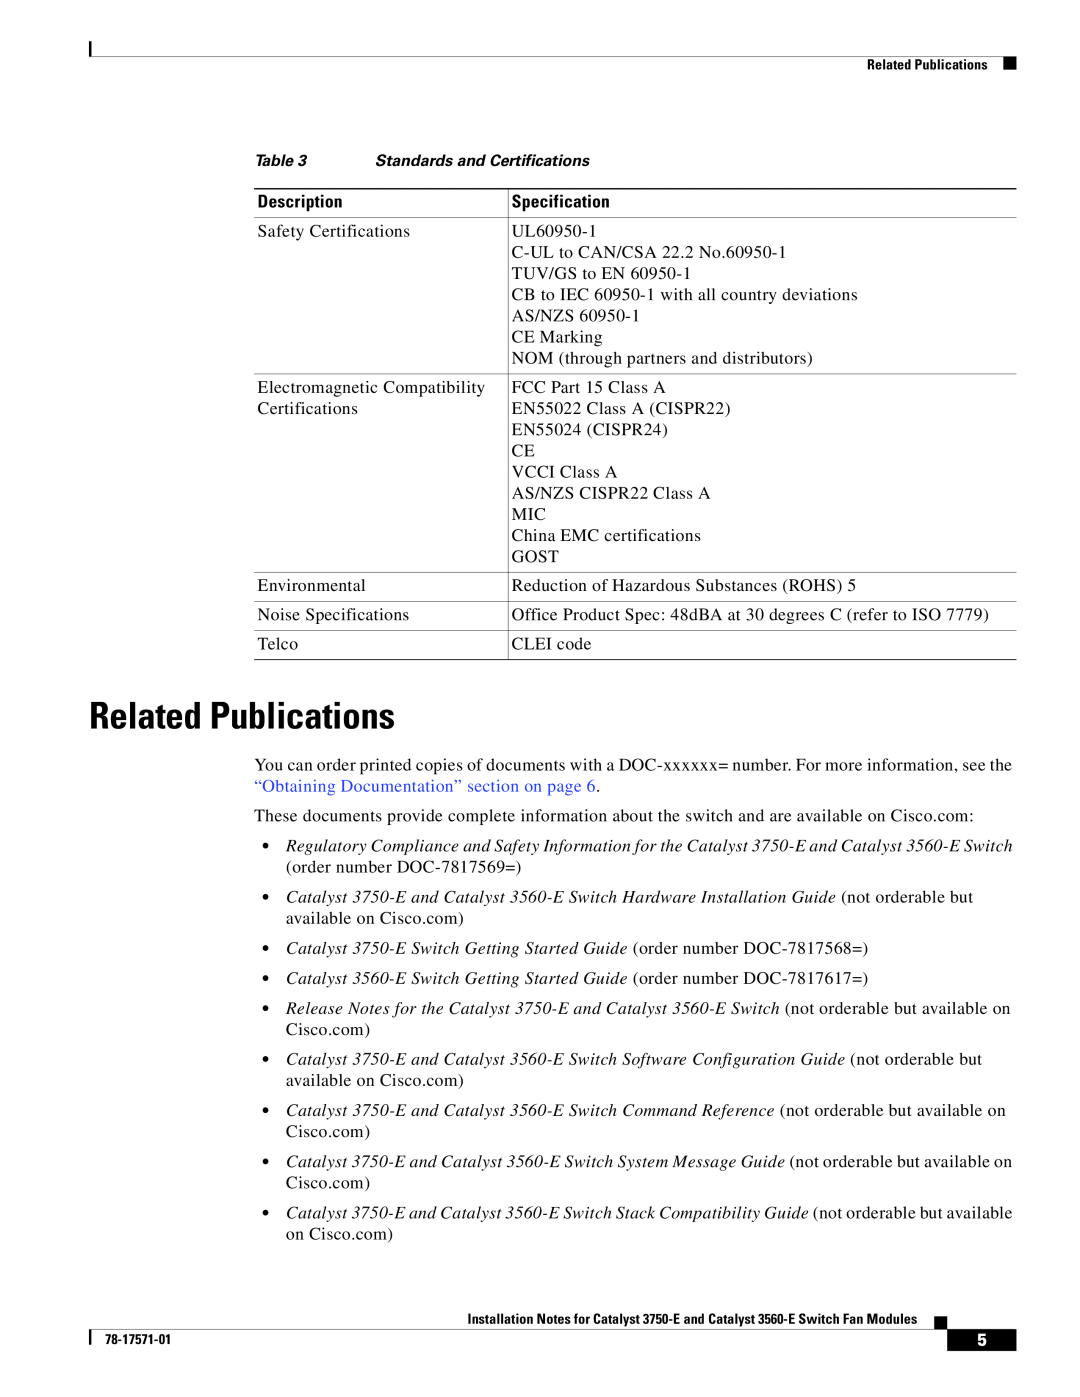 Cisco Systems Catalyst 3560-E technical specifications Related Publications 